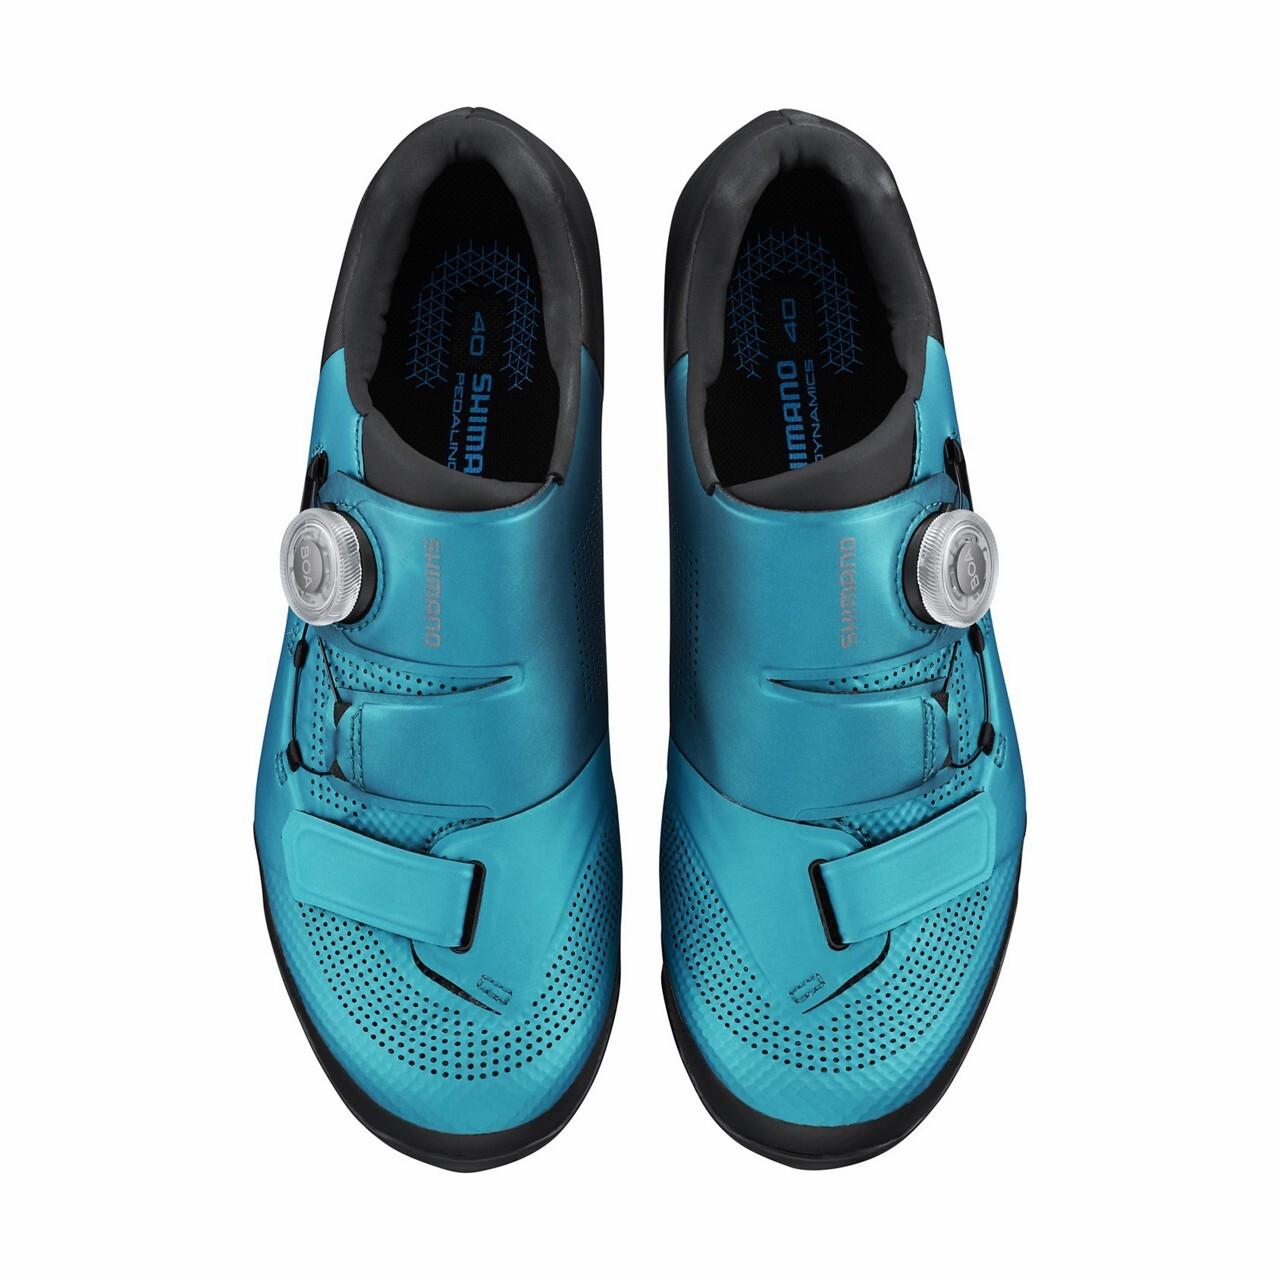 SHIMANO  Chaussures femme  SH-XC502 